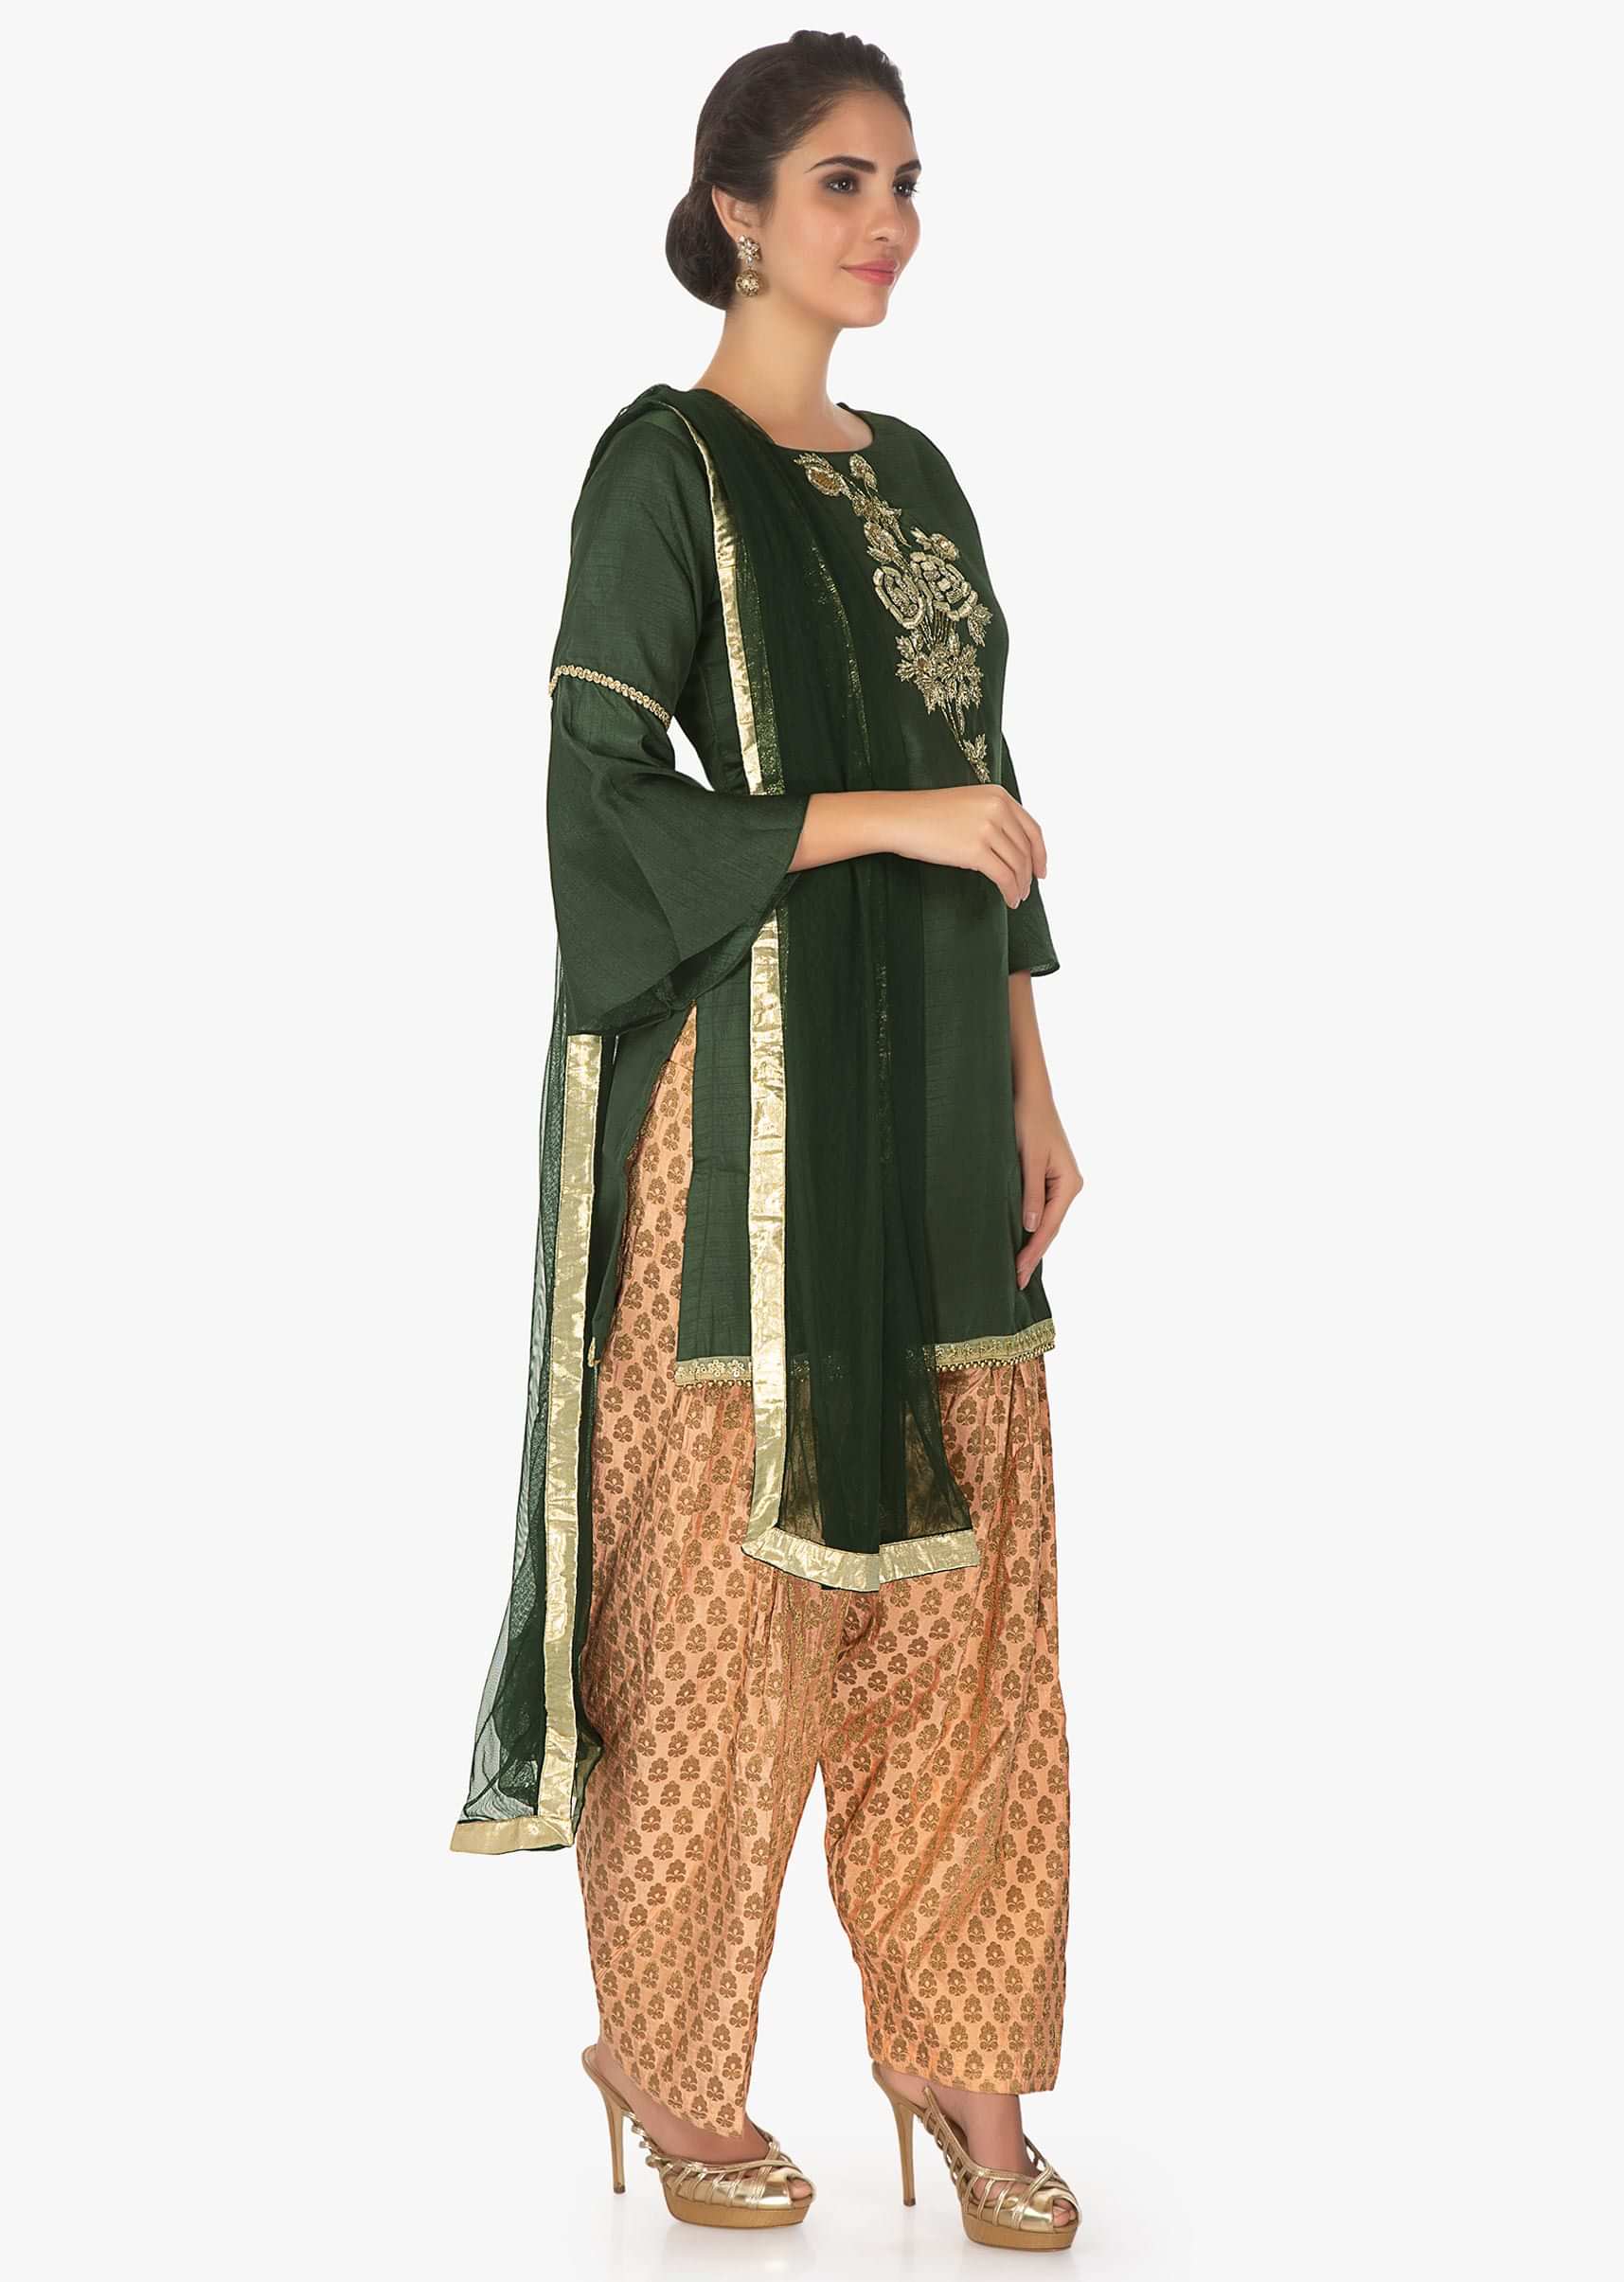 Black raw silk embellished top paired with beige weaved  pant and net dupatta 